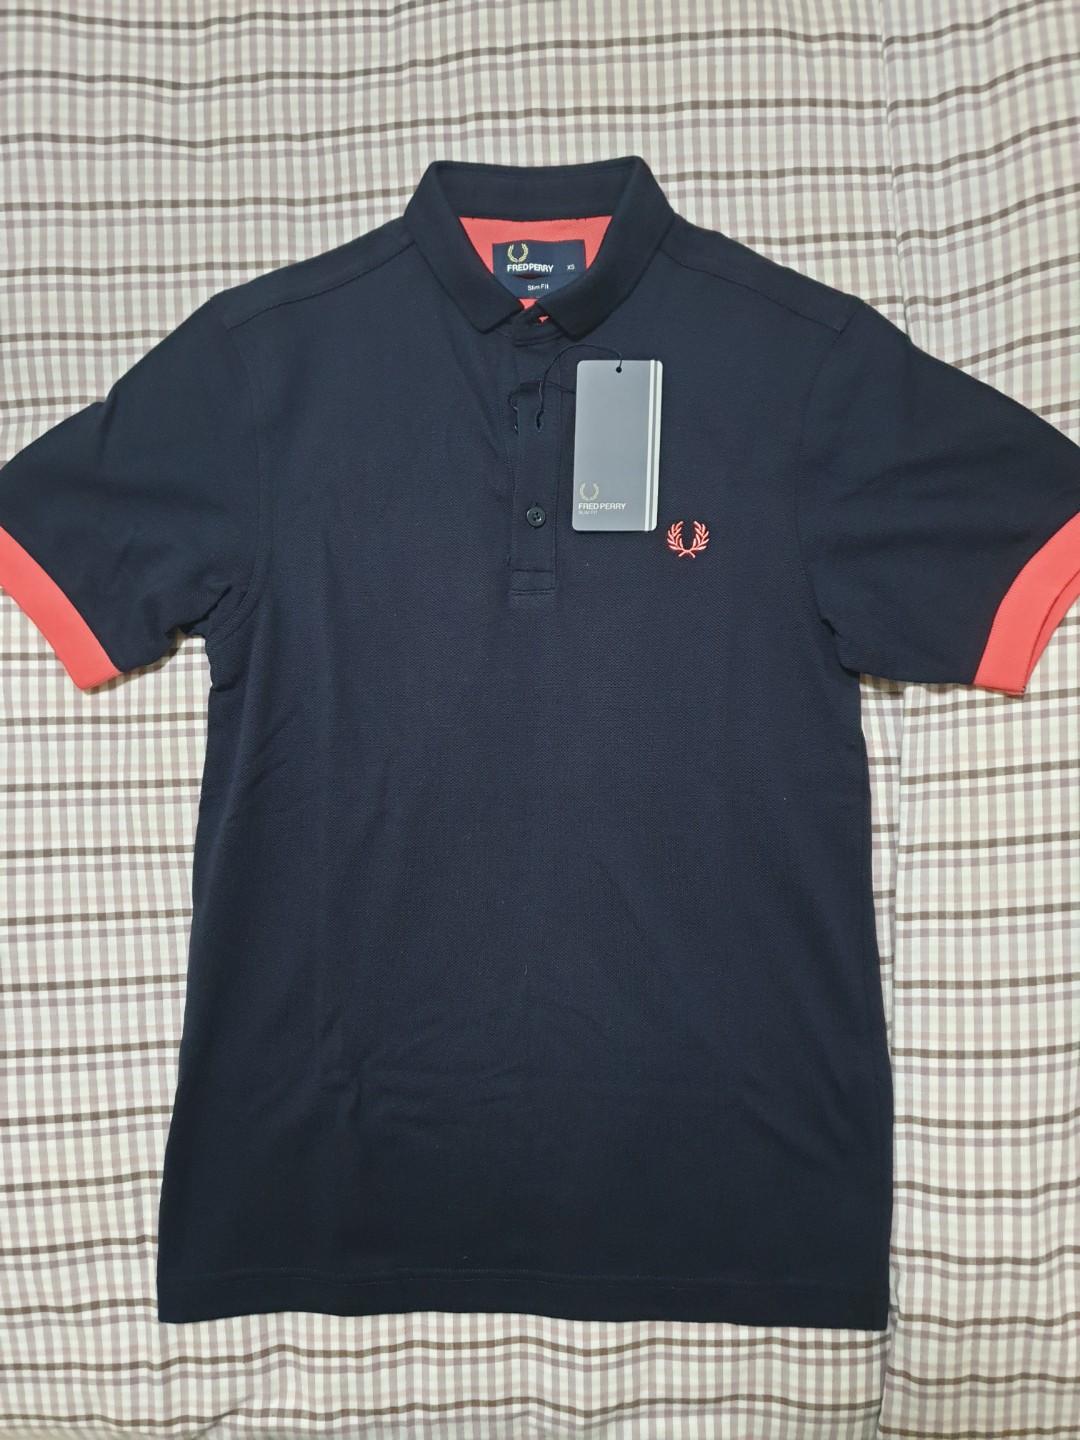 Expertise Stadscentrum Ale Fred Perry Polo Shirt (BNWT/XS/Slim Fit), Men's Fashion, Tops & Sets,  Tshirts & Polo Shirts on Carousell